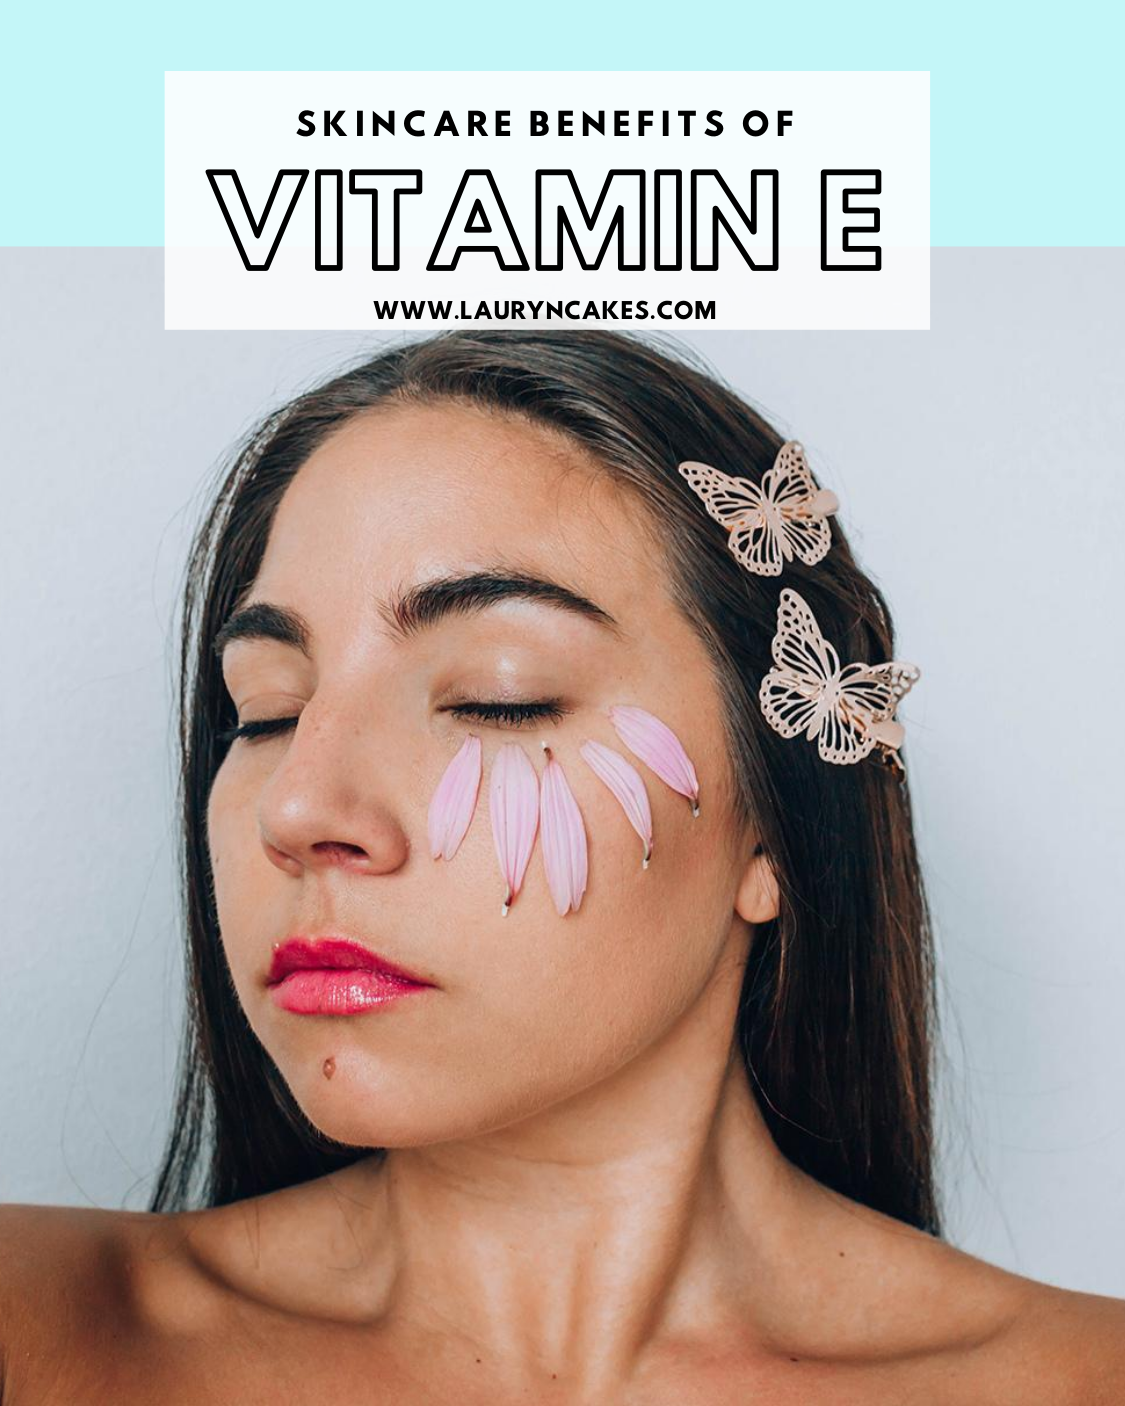 Close up portrait of woman (Lauryncakes) with flowers on her face and butterfly clips in her hair. Image has text that says: skincare benefits of Vitamin E